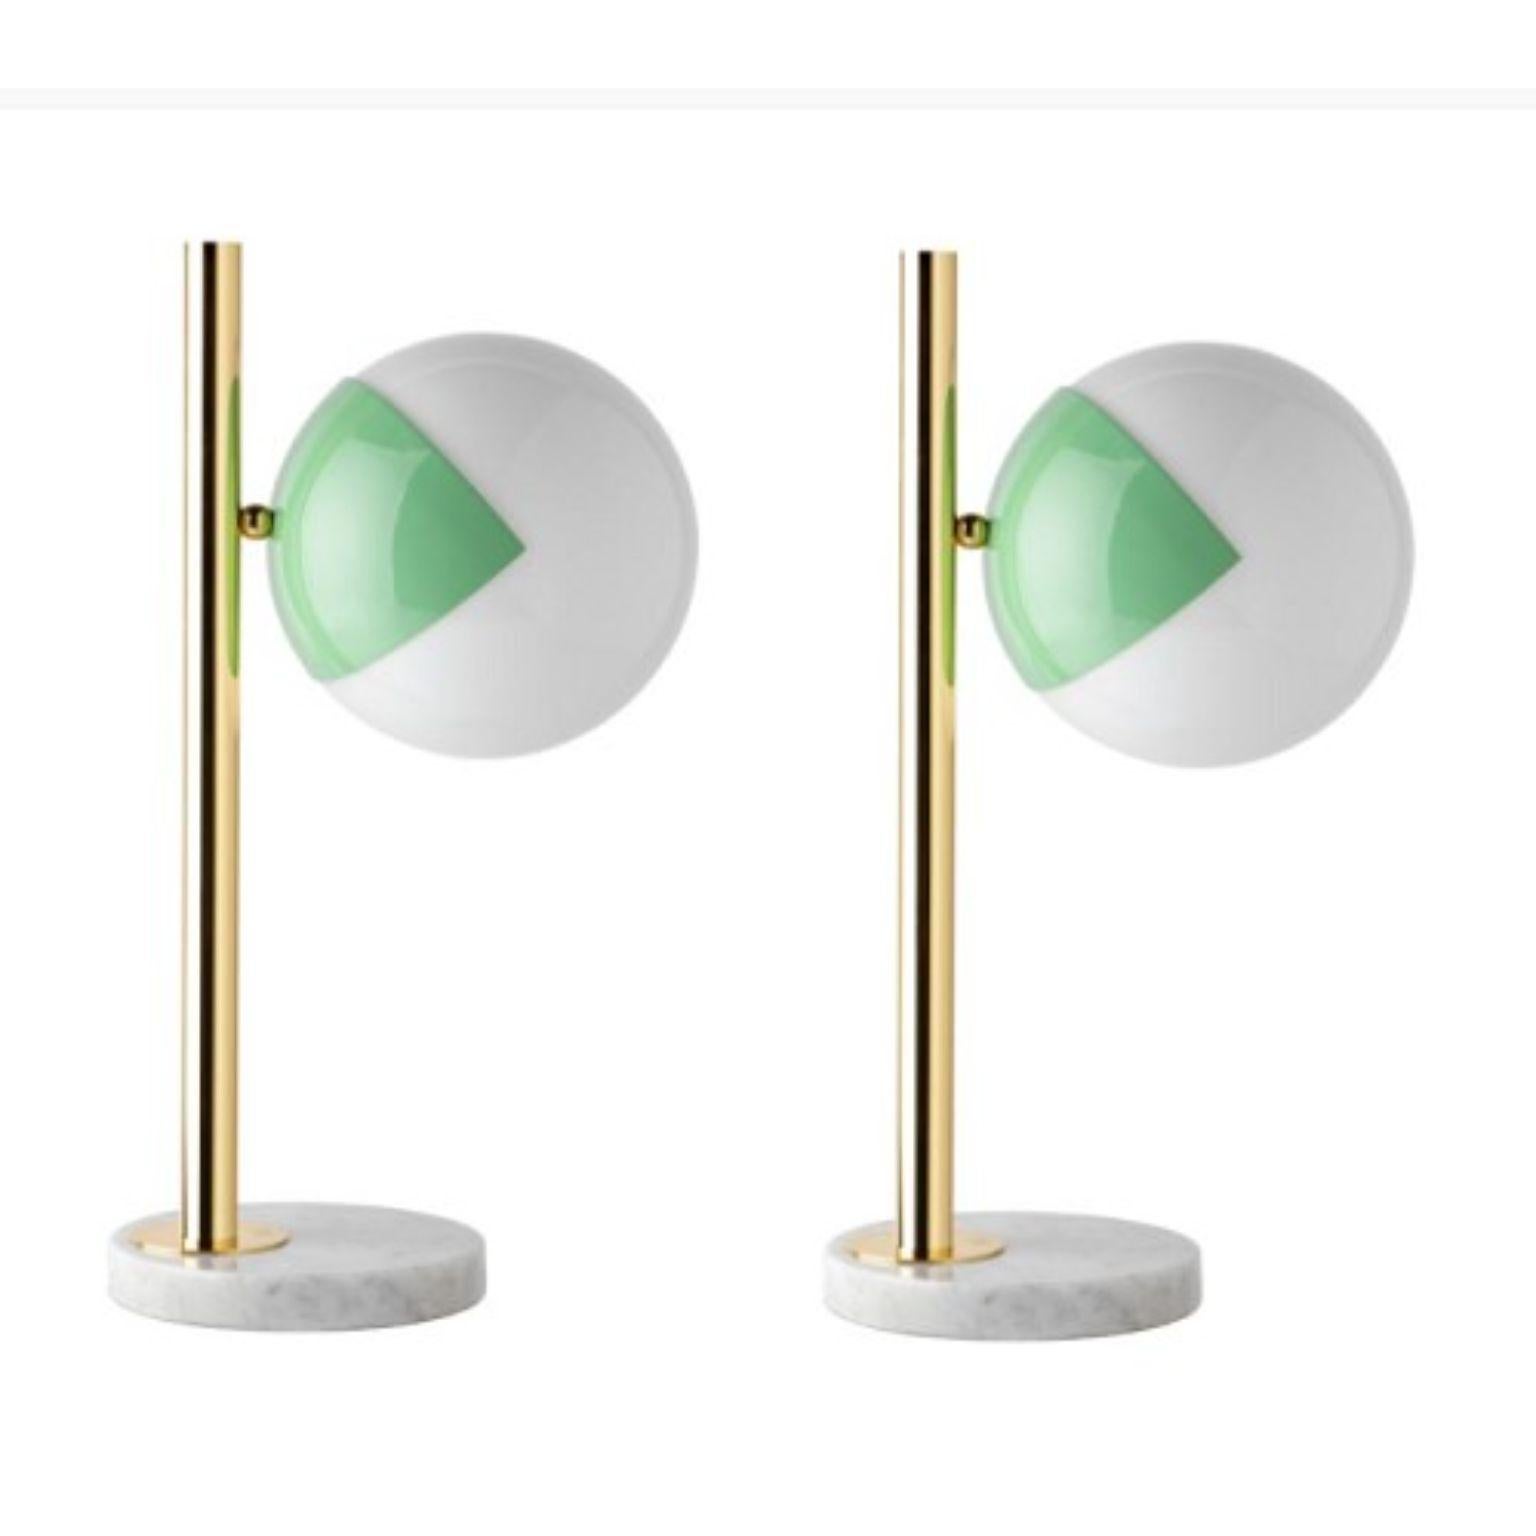 Green table lamp pop-up dimmable by Magic Circus Editions
Dimensions: Ø 22 x 30 x 53 cm 
Materials: Carrara marble base, smooth brass tube, glossy mouth blown glass
Also non-dimmable version available.

All our lamps can be wired according to